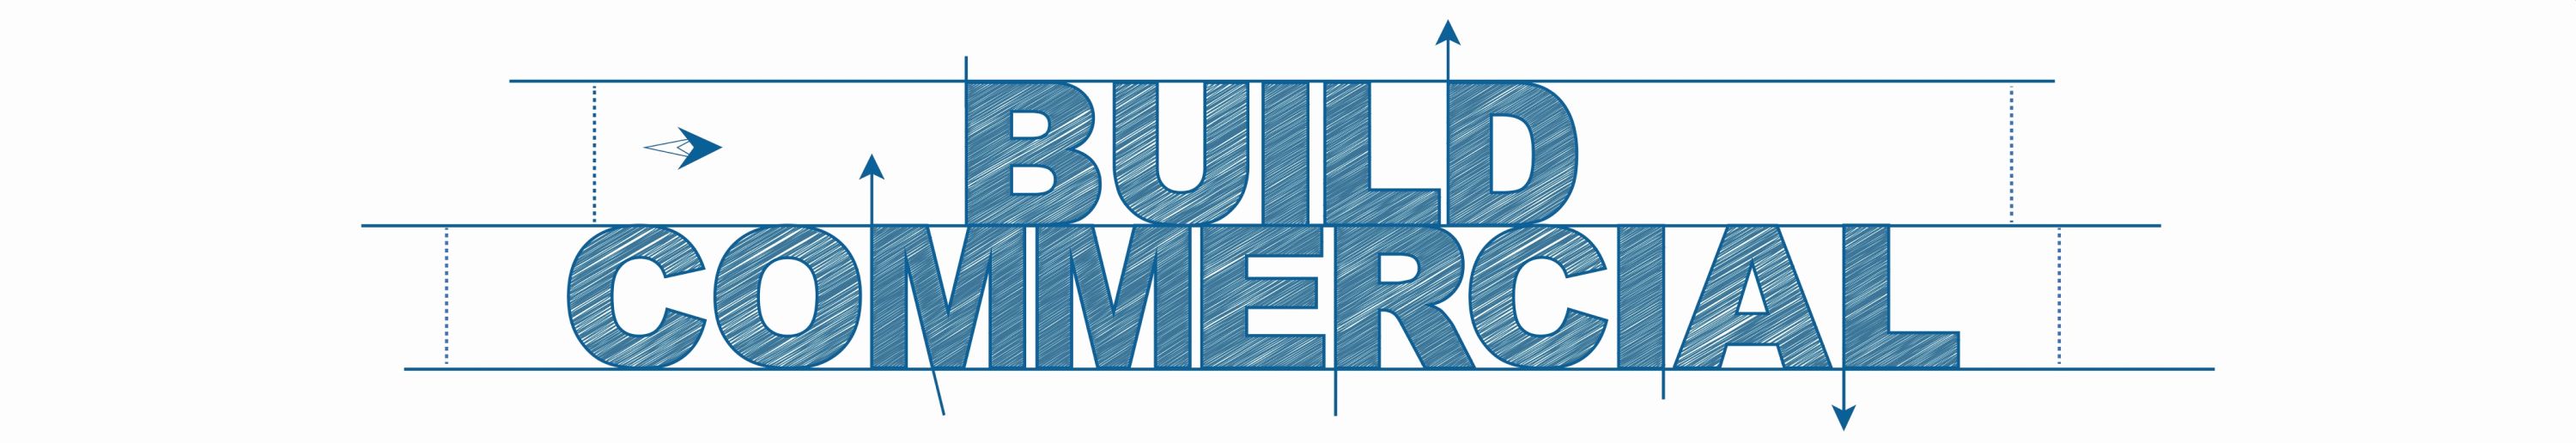 build commercial graphic